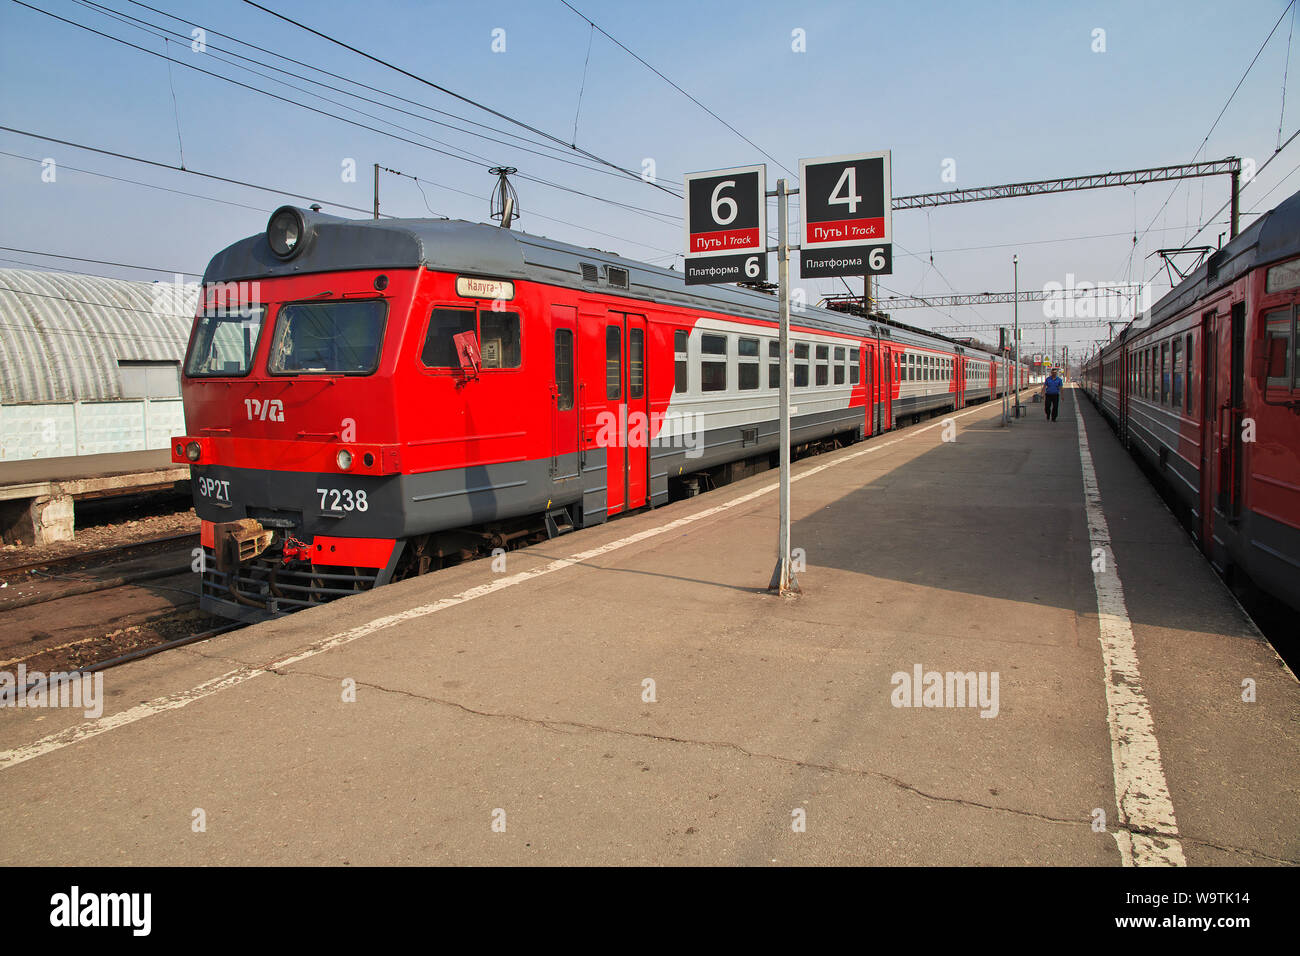 'Kaluga-1. Express'. Old train in Moscow, Russia Stock Photo